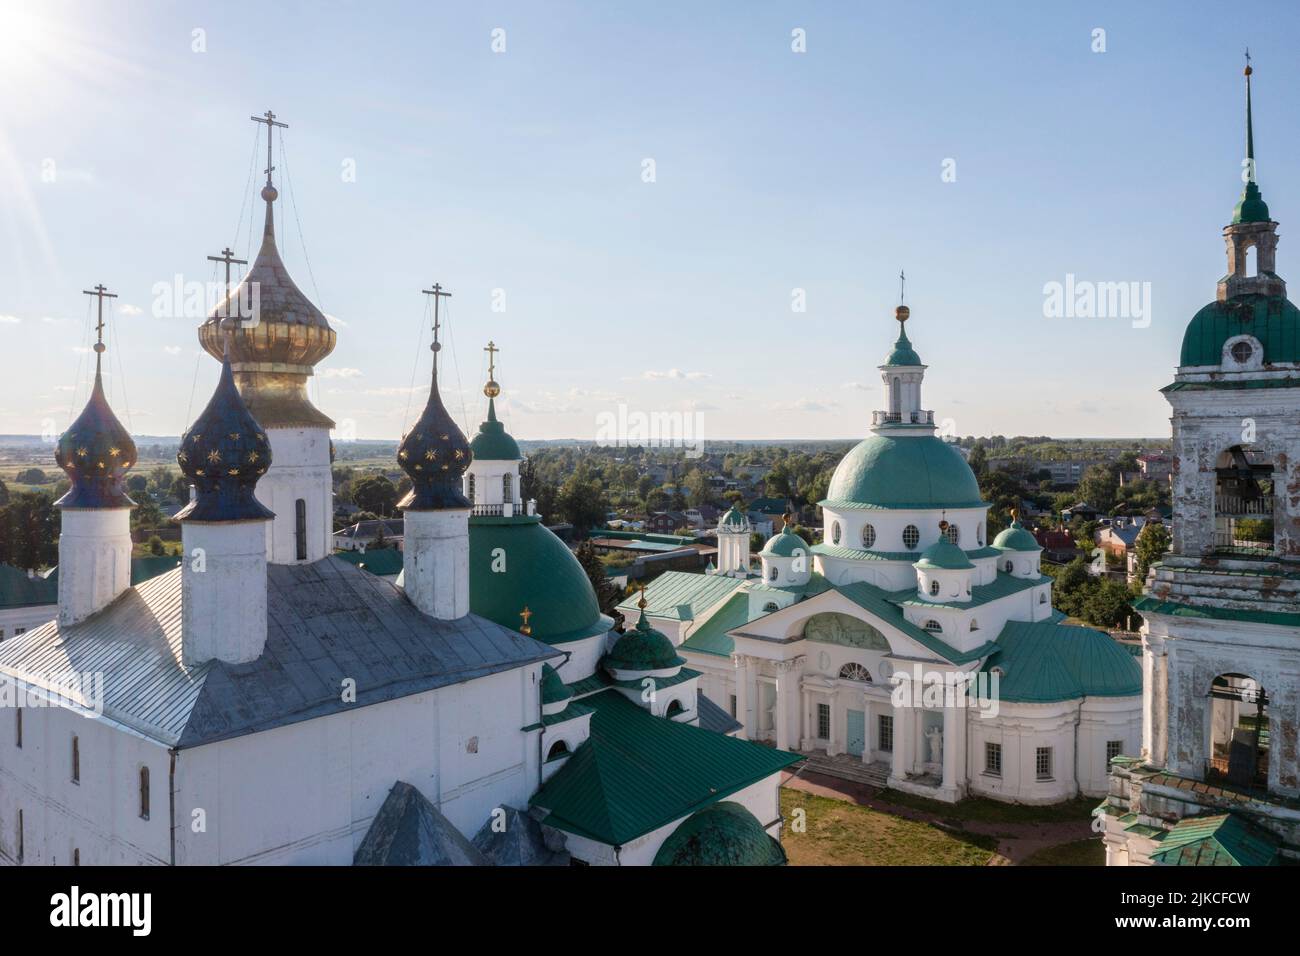 Aerial view of the Spaso-Yakovlevsky Dimitriev monastery from the lake Nero in Rostov The Great town, Russia Stock Photo